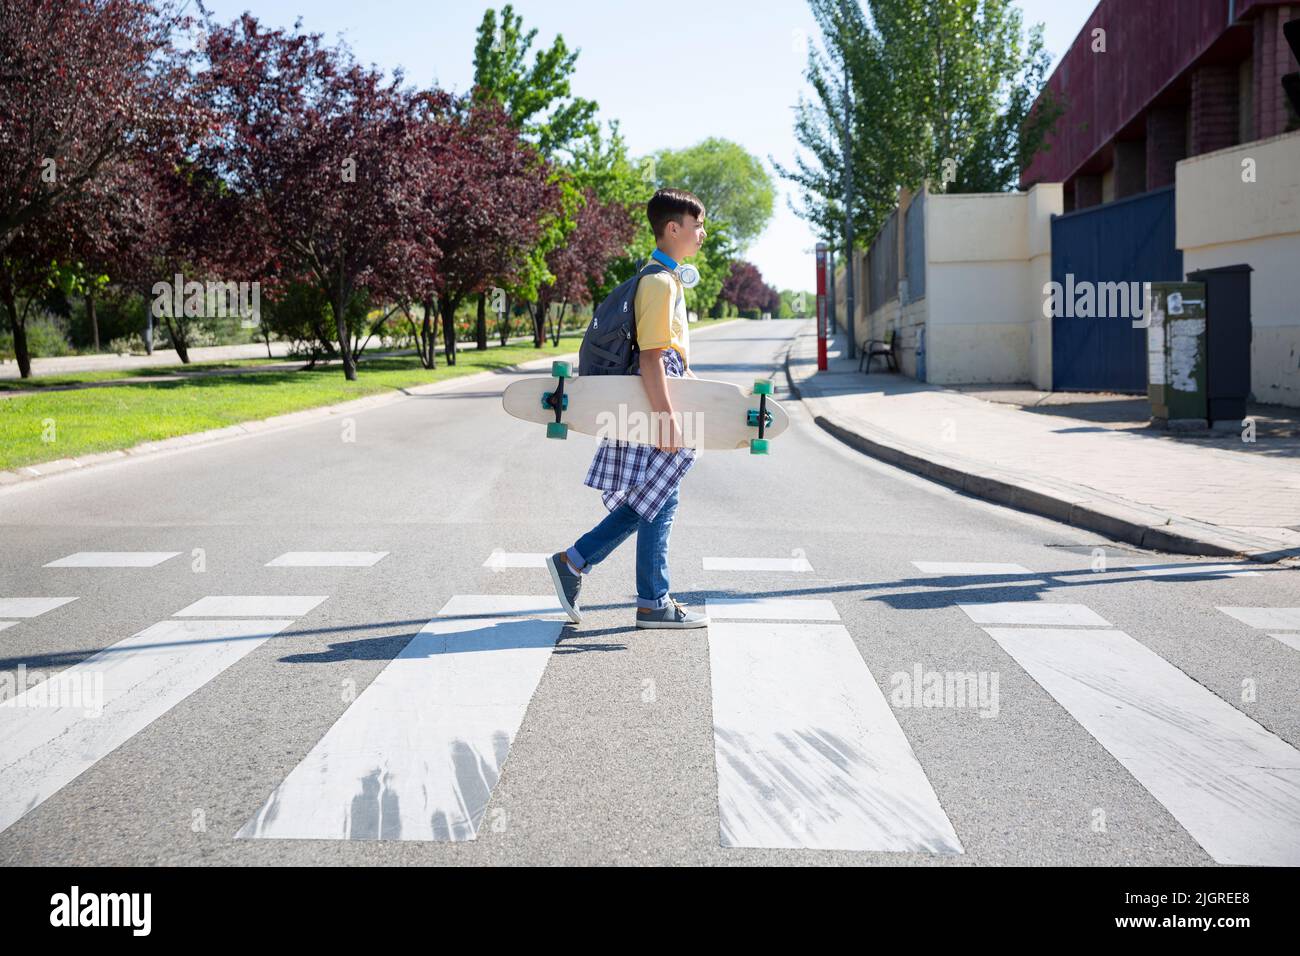 High school student boy with longboard skate crossing street. Space for text. Stock Photo